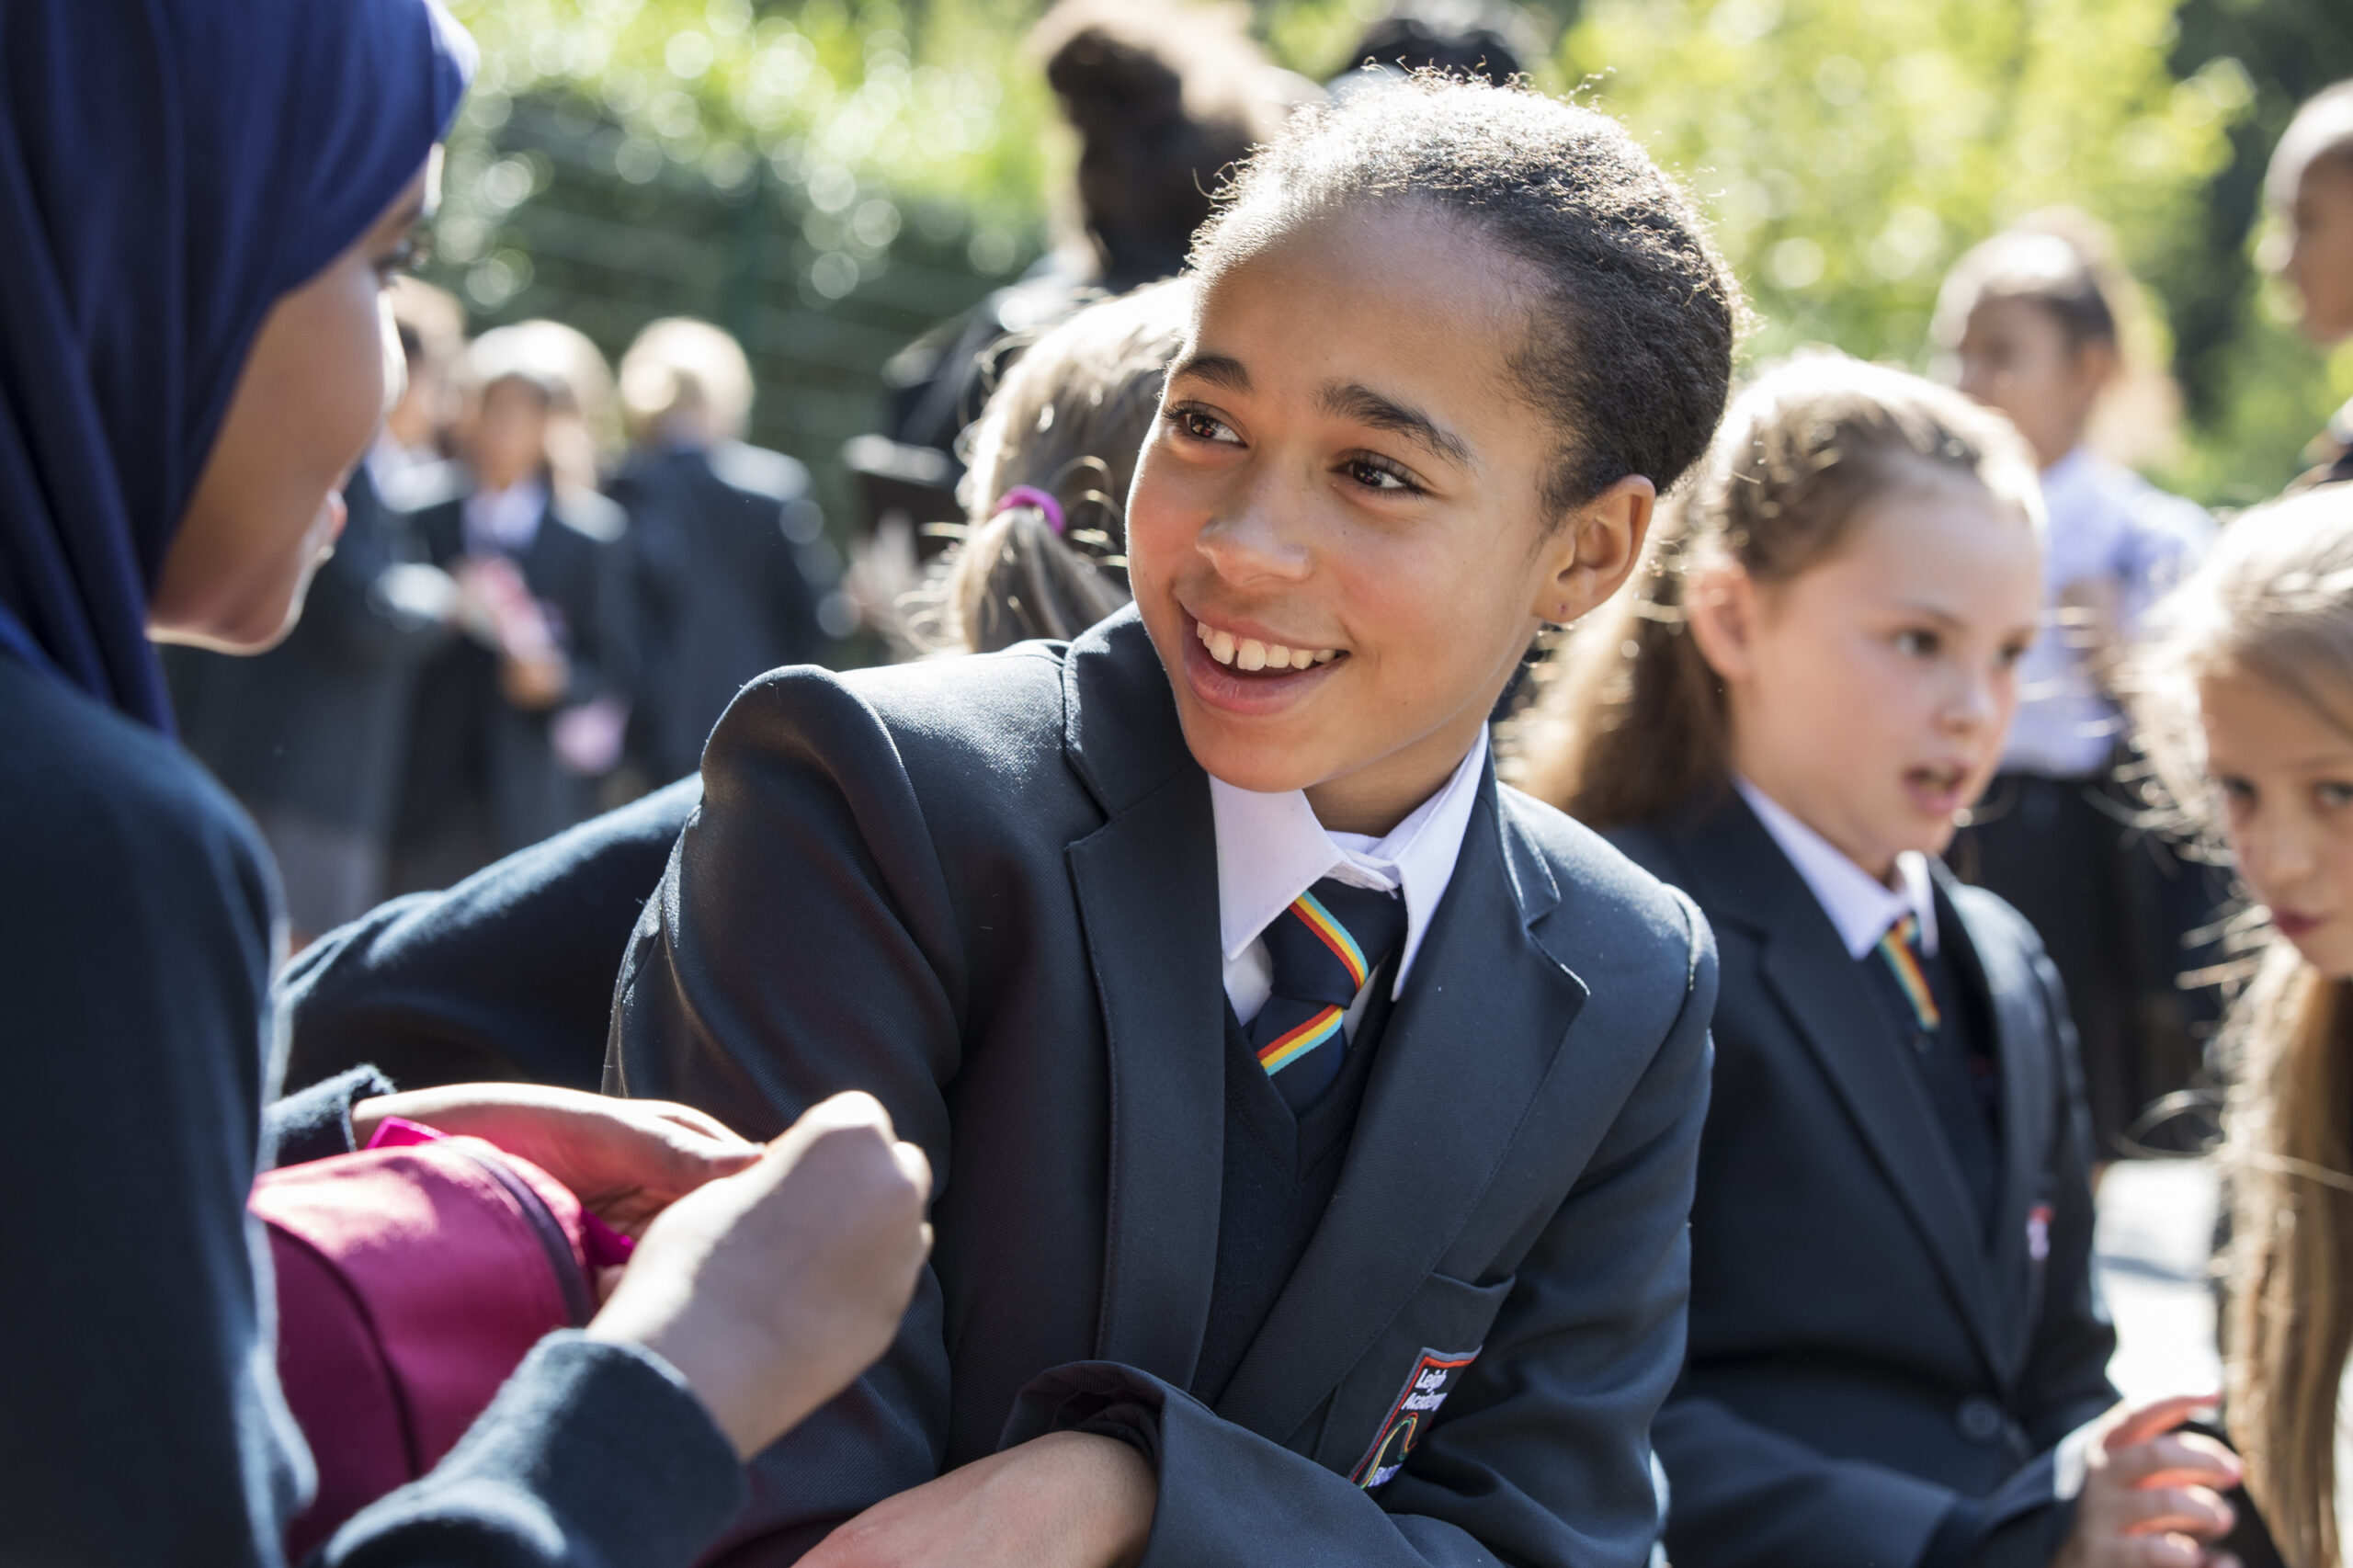 A female student is seen outdoors with a large group of others, wearing academy uniform and smiling at another student.